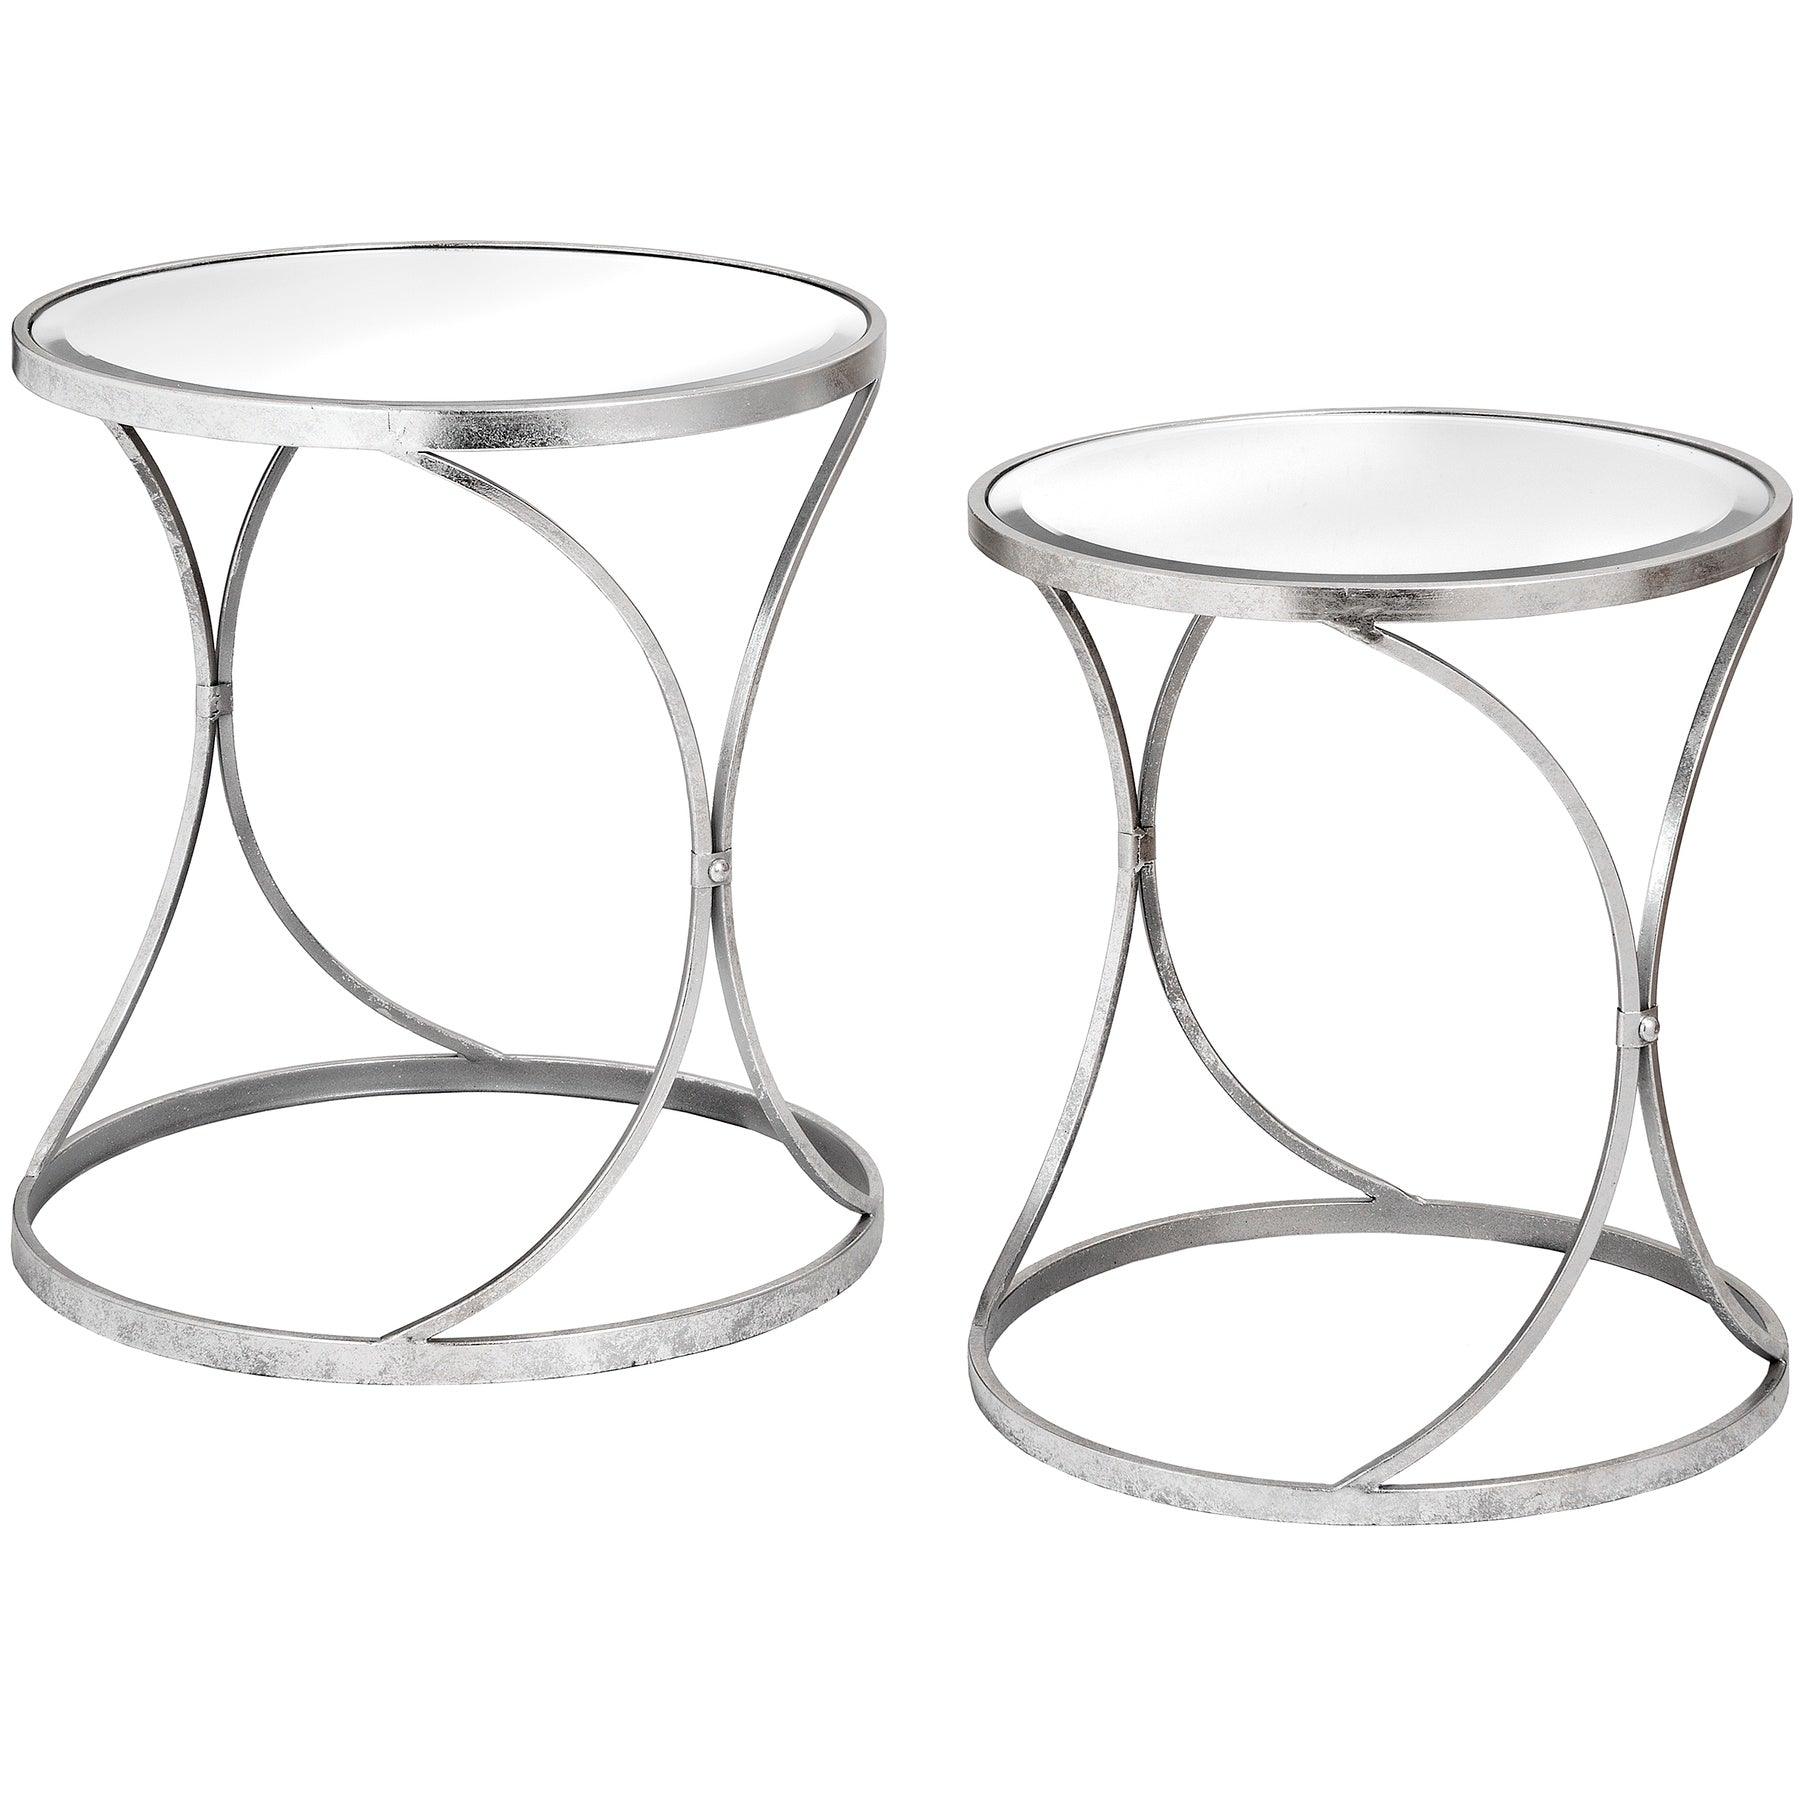 View Silver Curved Design Set Of 2 Side Tables information